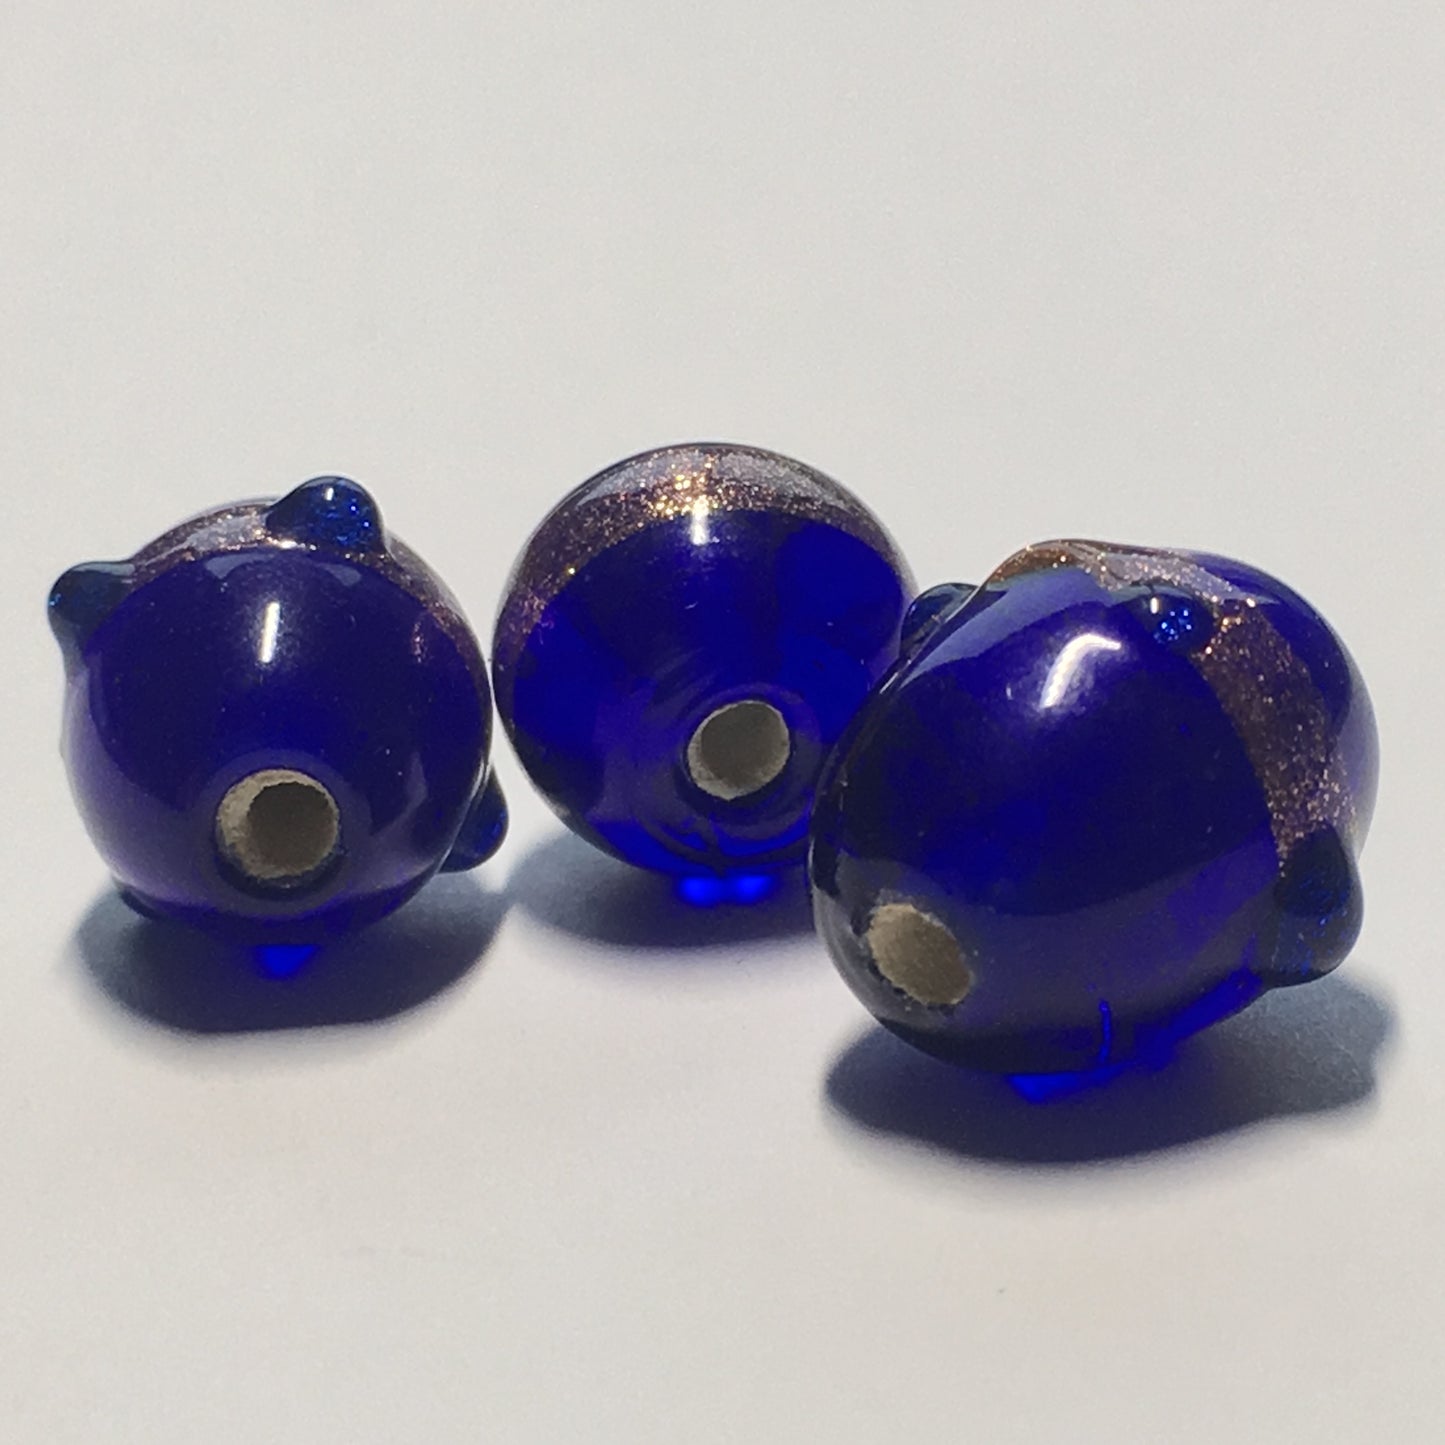 Transparent Cobalt Blue Lampwork Glass with Copper Foil Swirl, Ovals and Round, 3 Beads